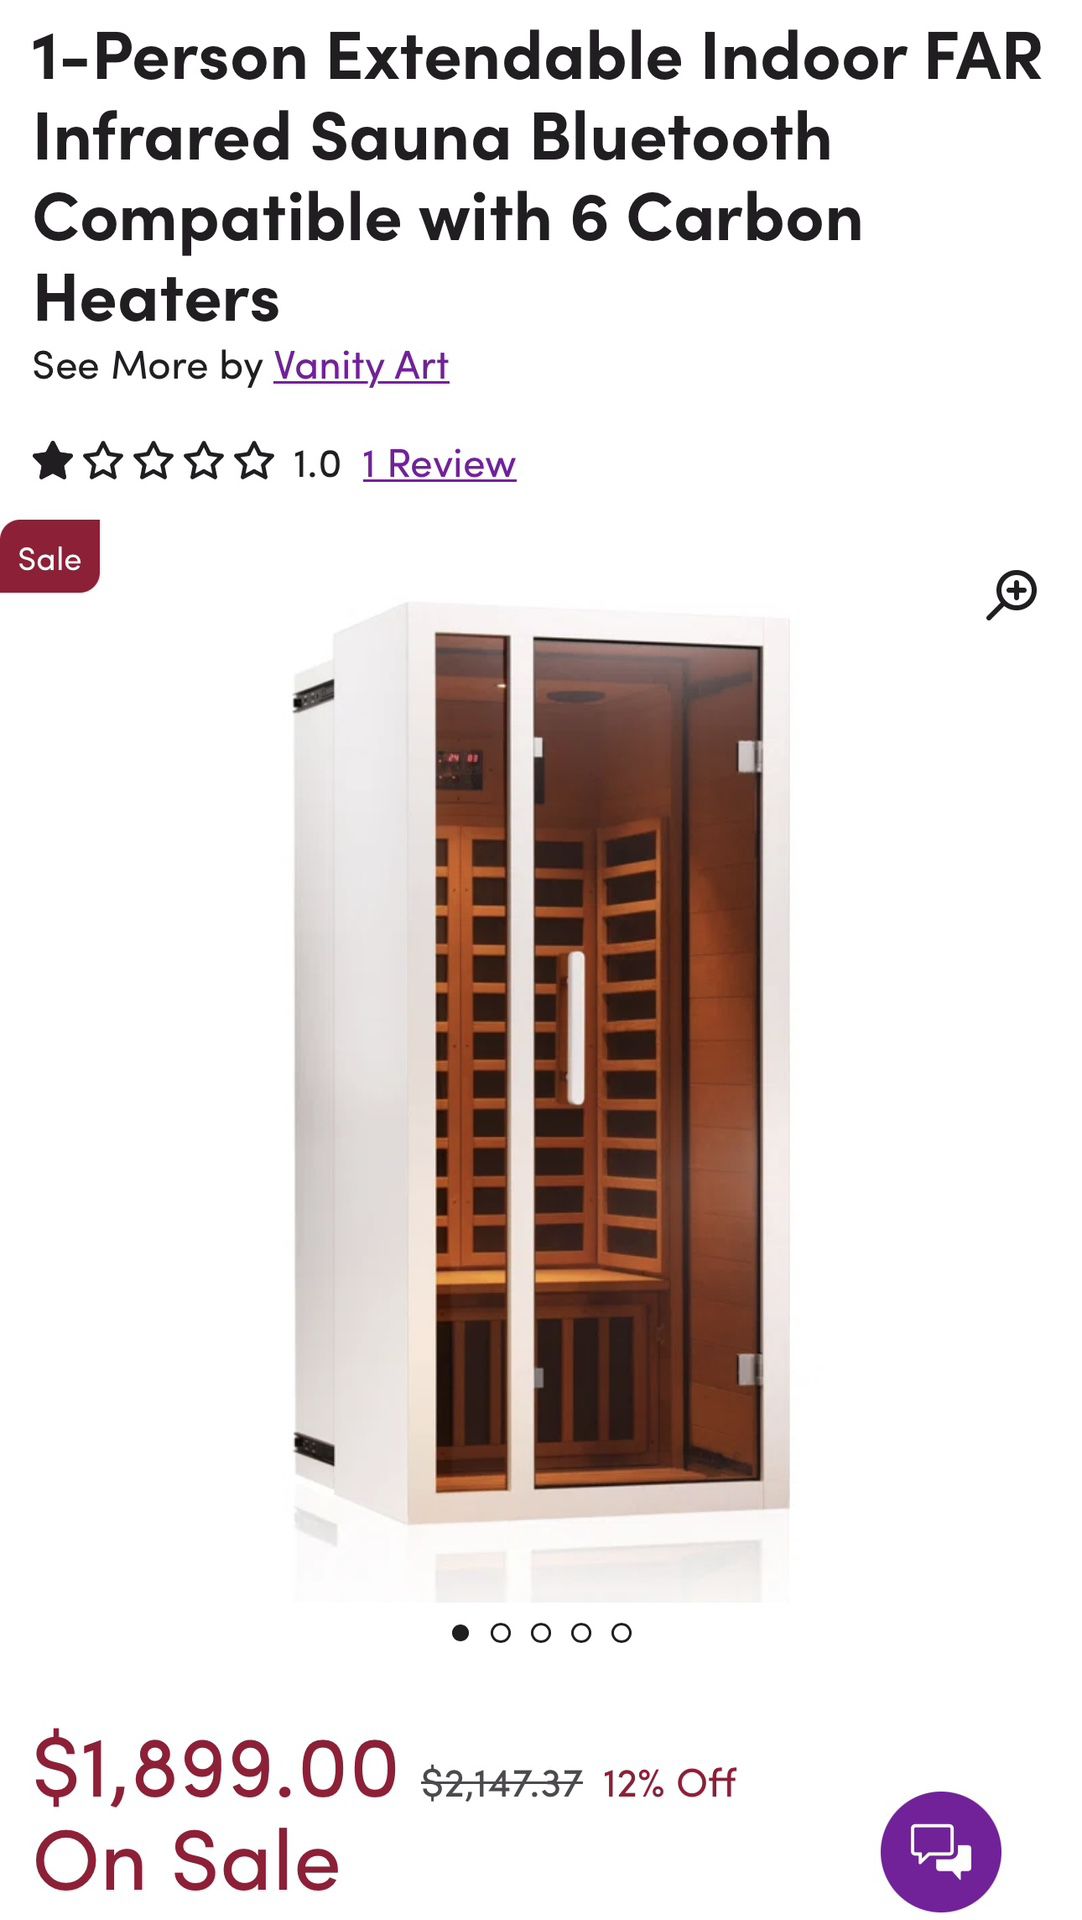 1-Person Extendable Indoor FAR Infrared Sauna Bluetooth Compatible